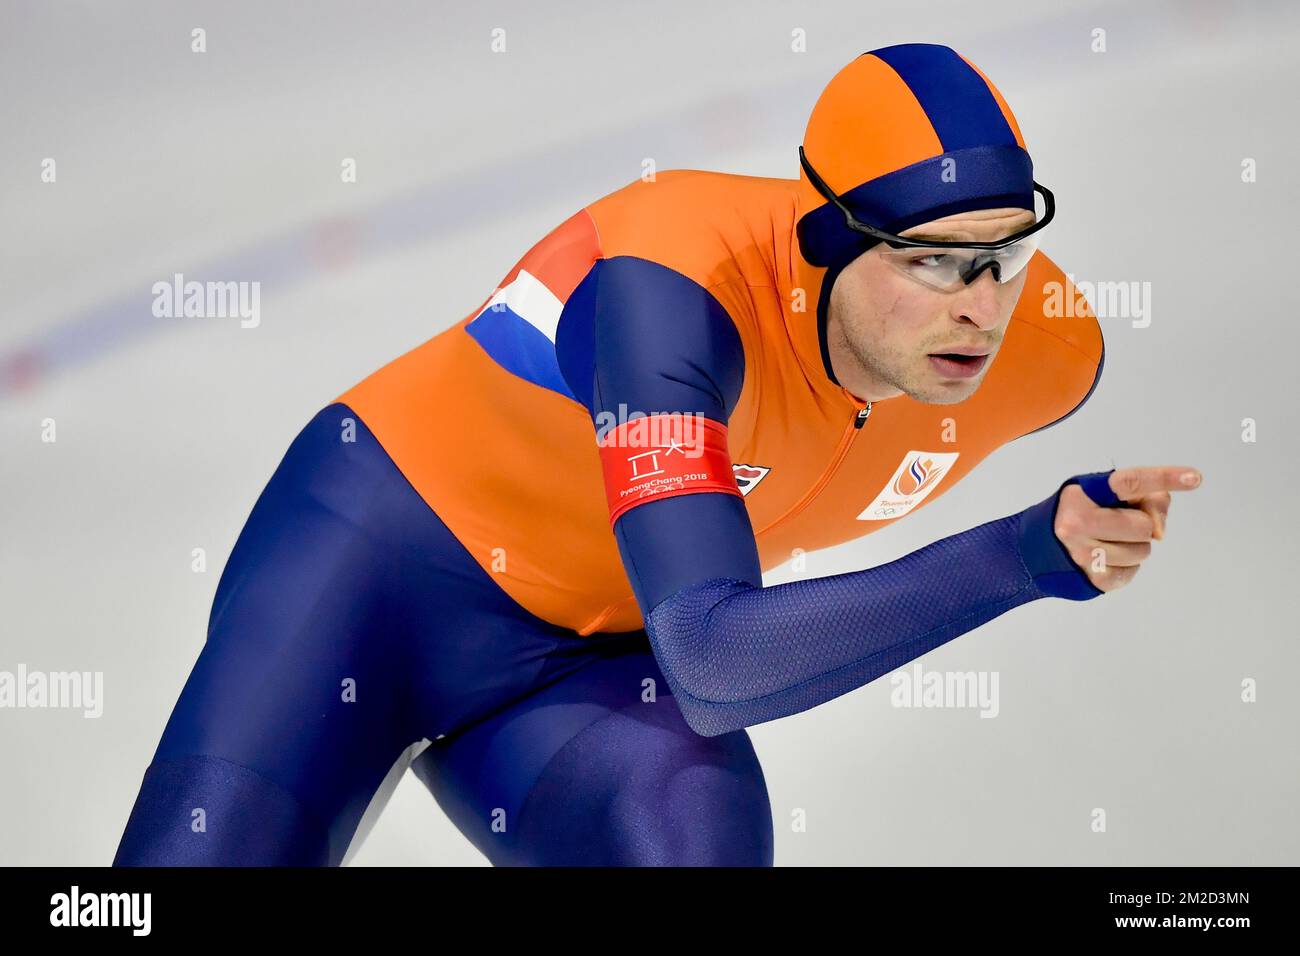 Dutch Sven Kramer pictured during the finals of the Men's 10.000 speed skating event at the XXIII Olympic Winter Games, Thursday 15 February 2018, in Pyeongchang, South Korea. The Winter Olympics are taking place from 9 February to 25 February in Pyeongchang County, South Korea. BELGA PHOTO DIRK WAEM Stock Photo